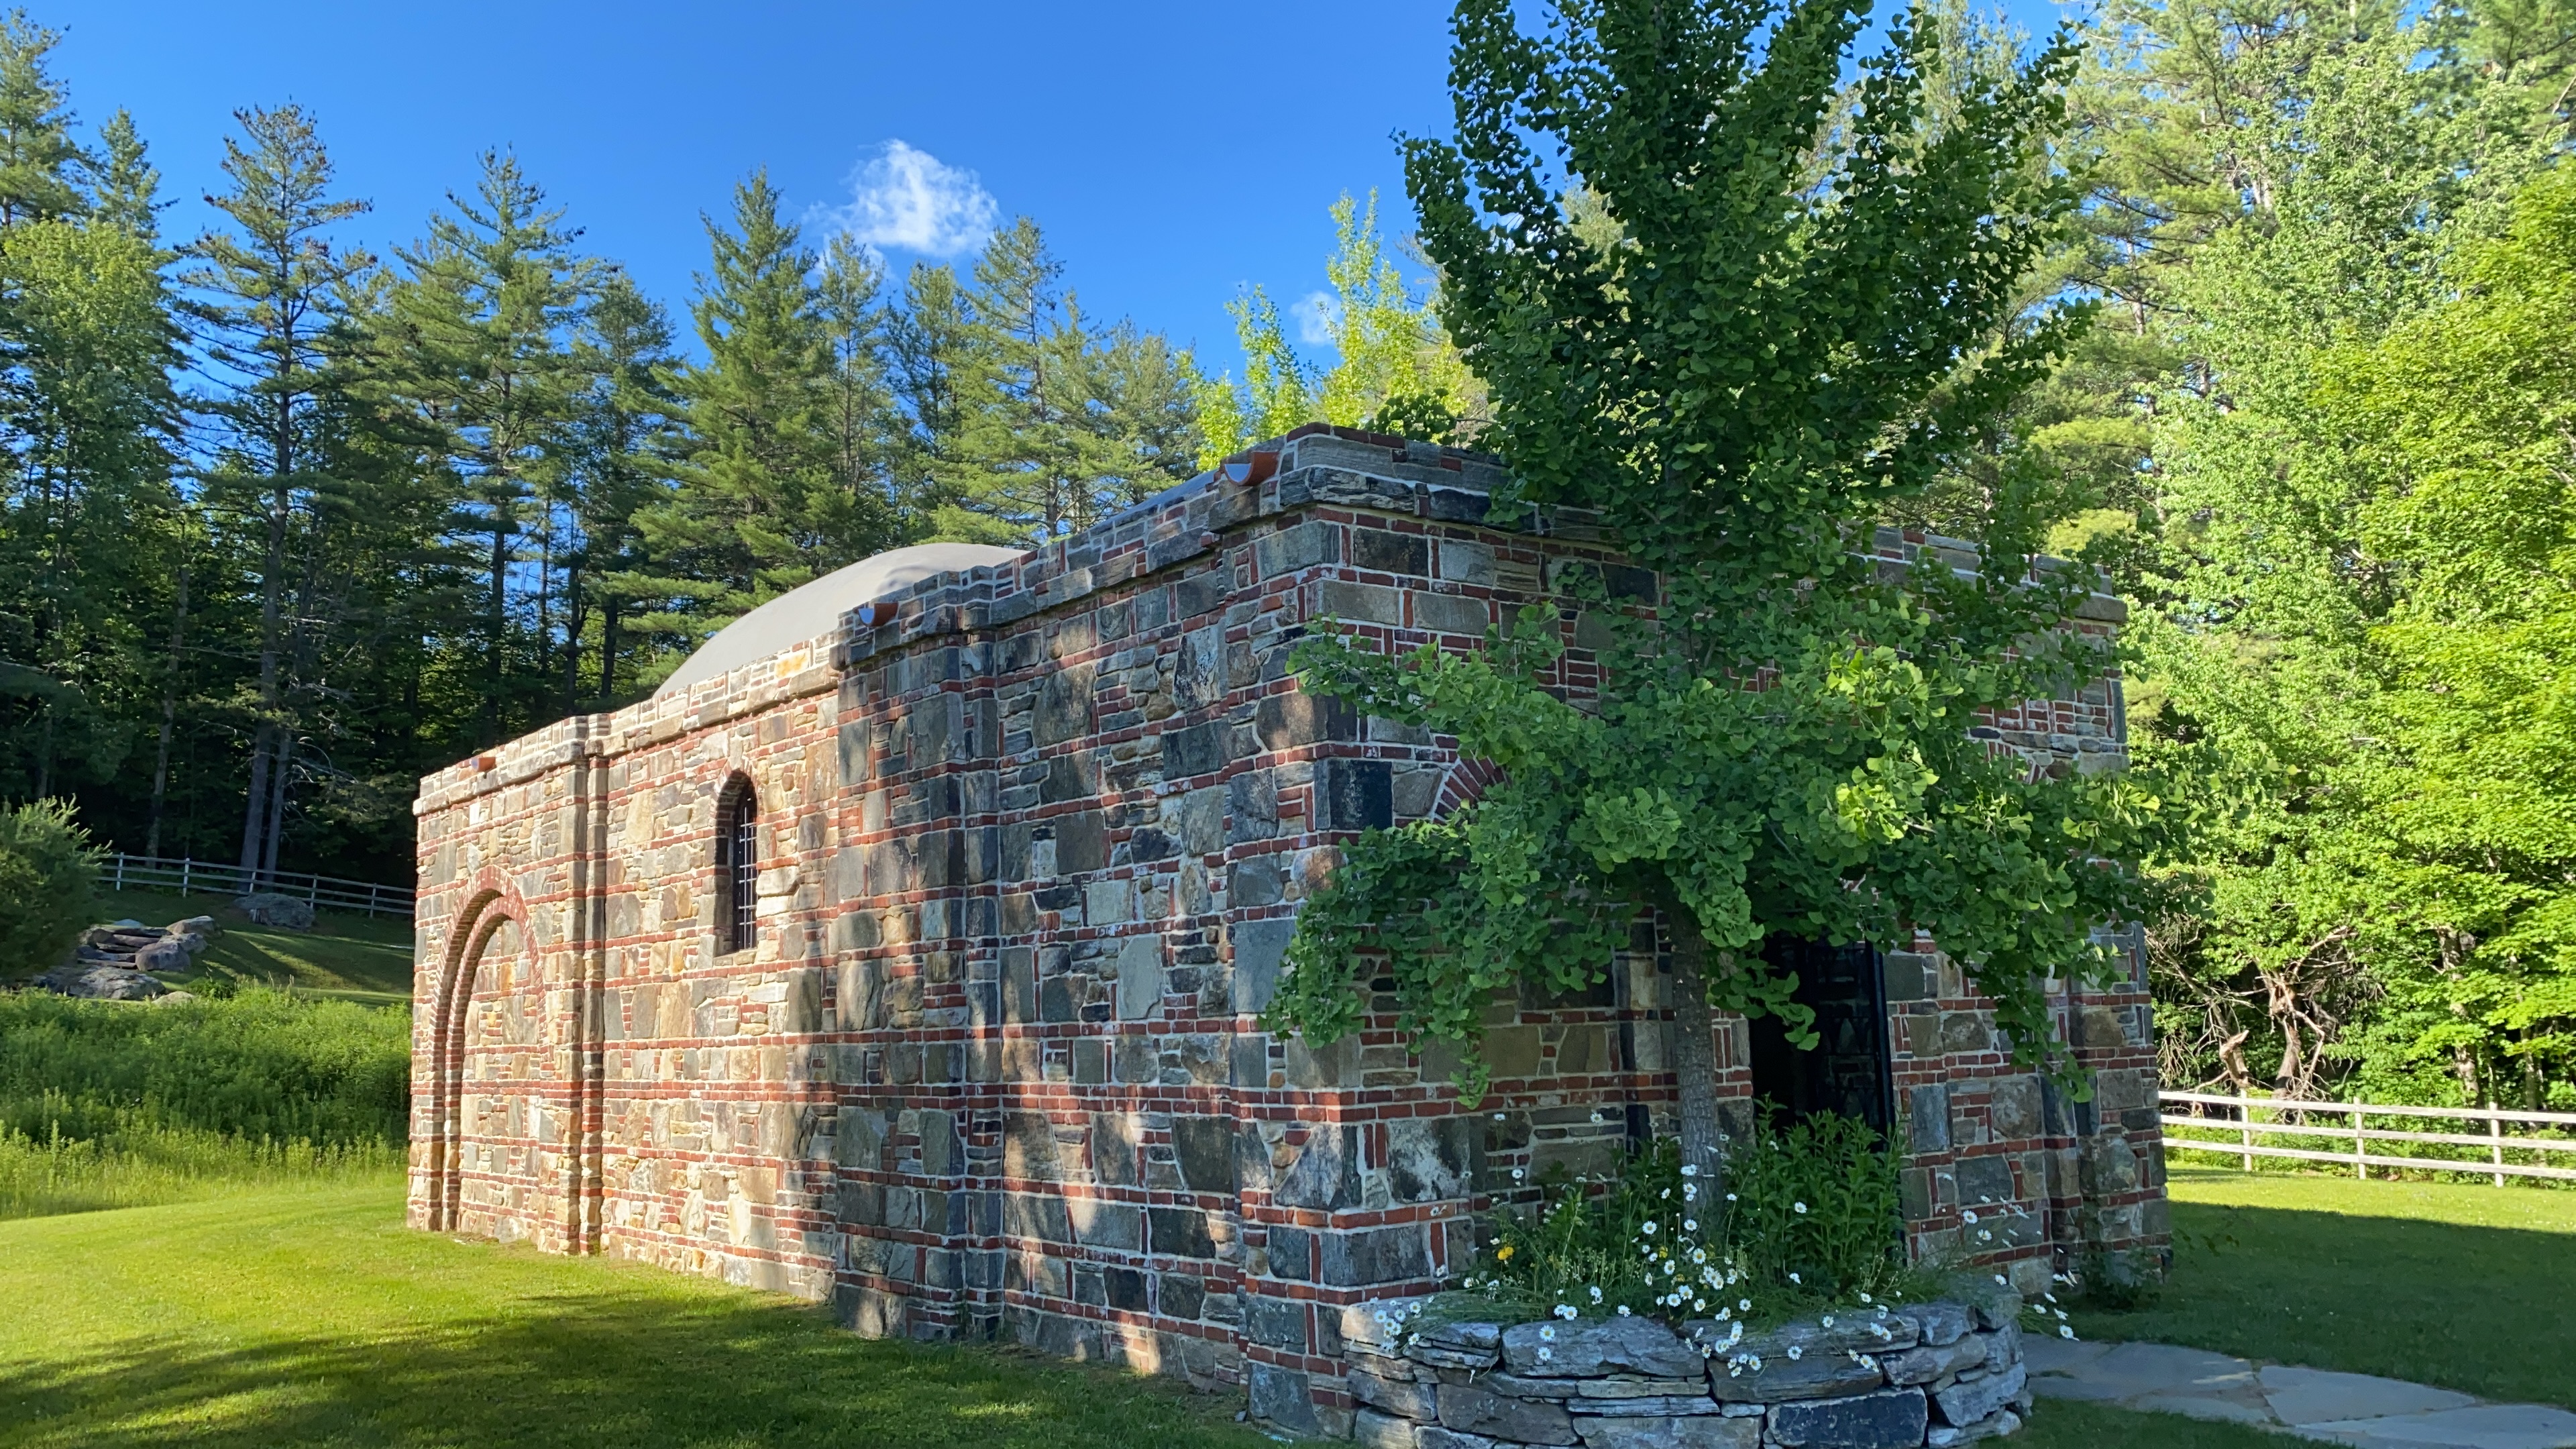 The Blessed Virgin Mary’s house in Vermont